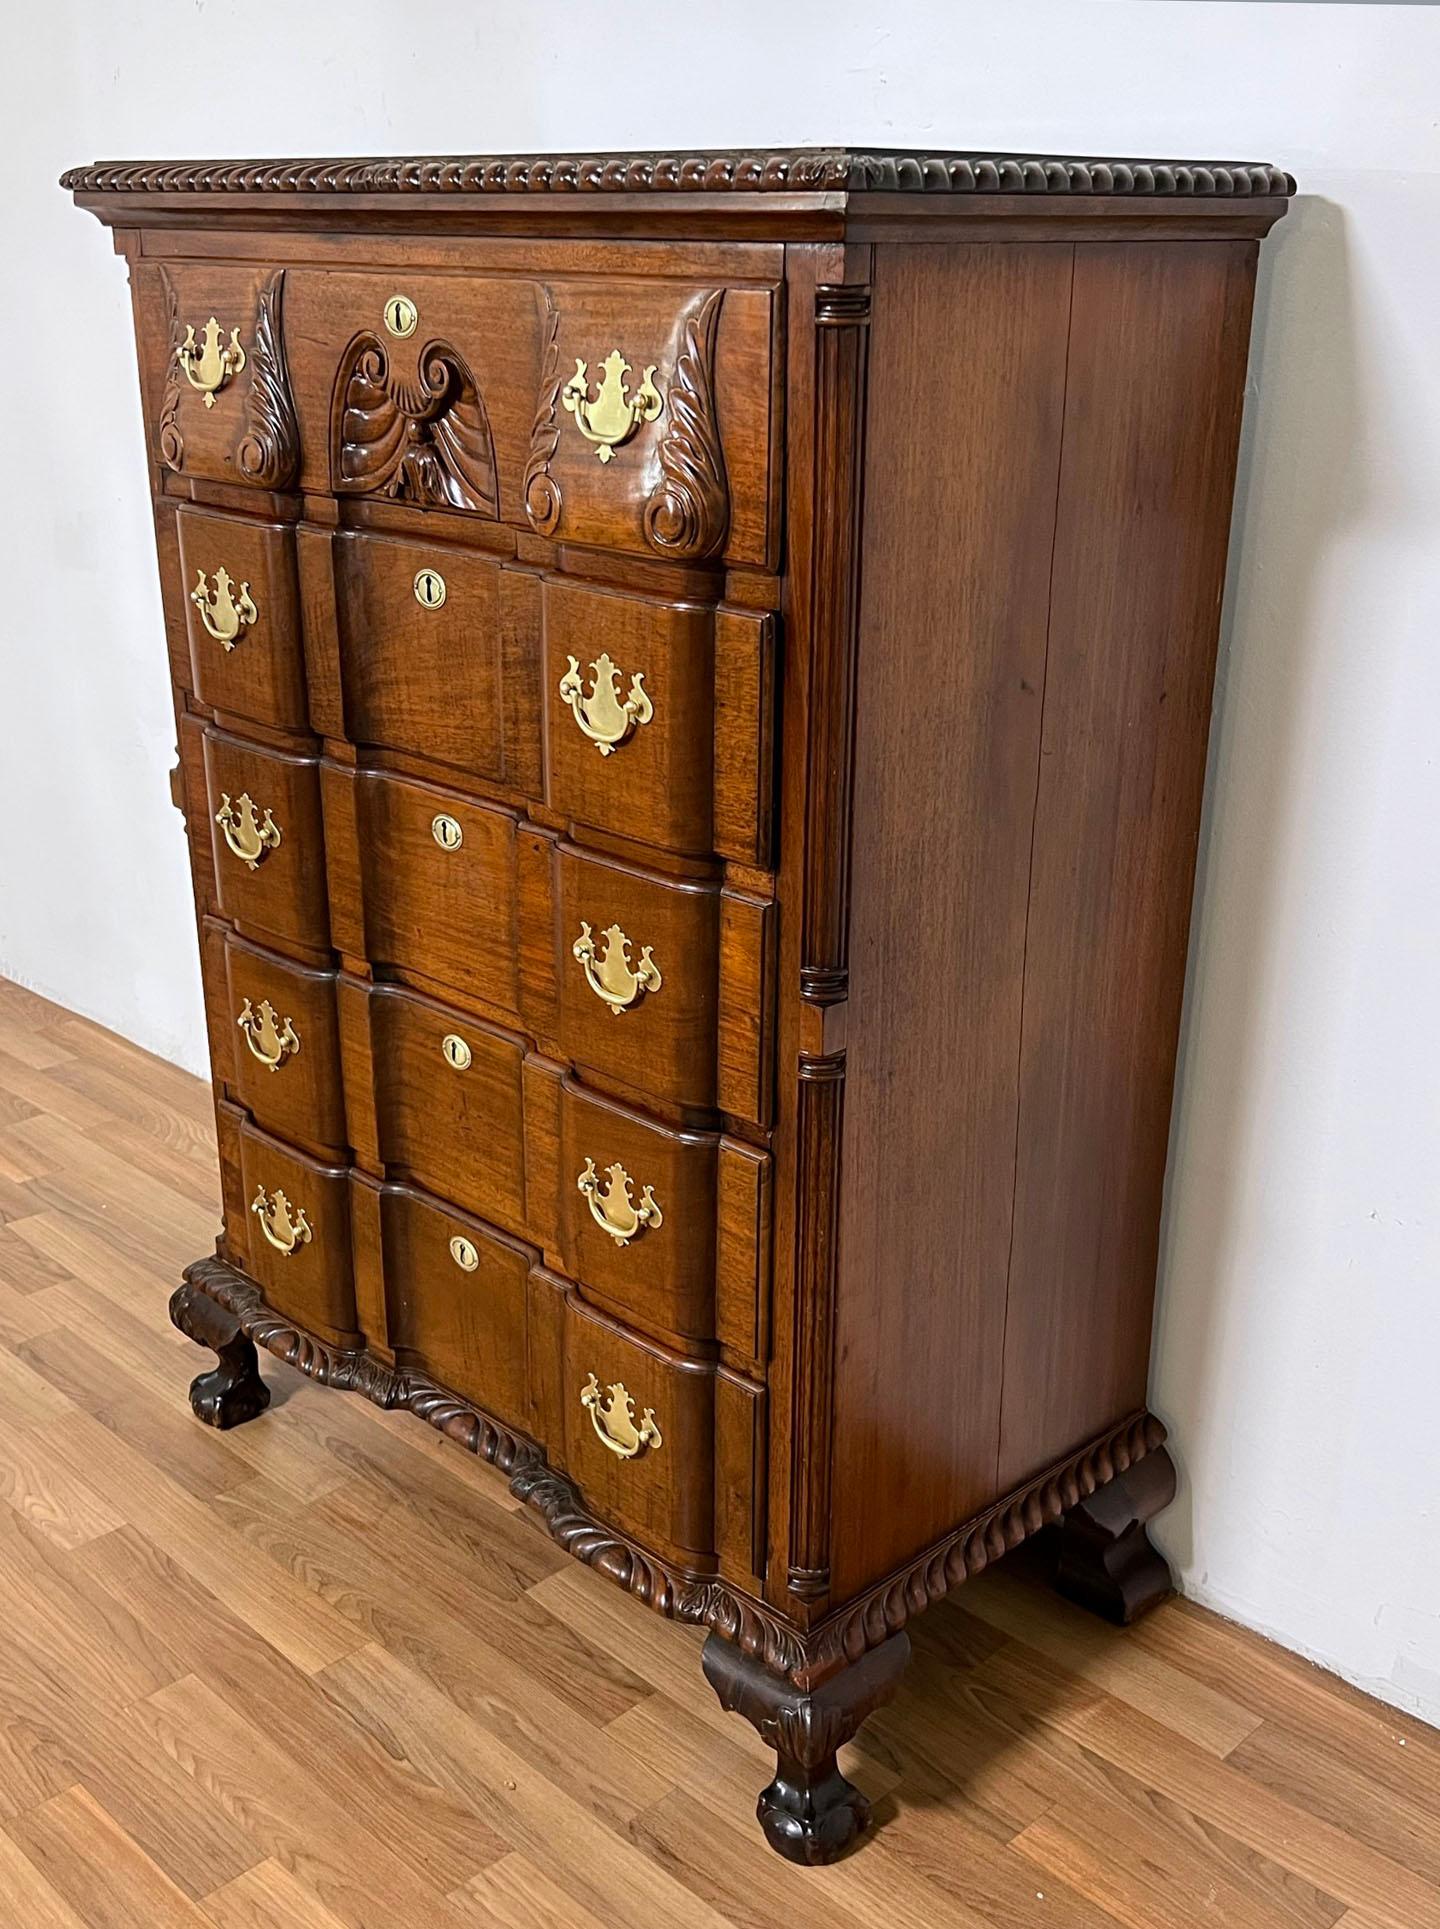 Early to mid 19th century Chippendale block front tall chest of five drawers in solid mahogany. Features its original batwing brasses and upper and lower gadrooned moldings.